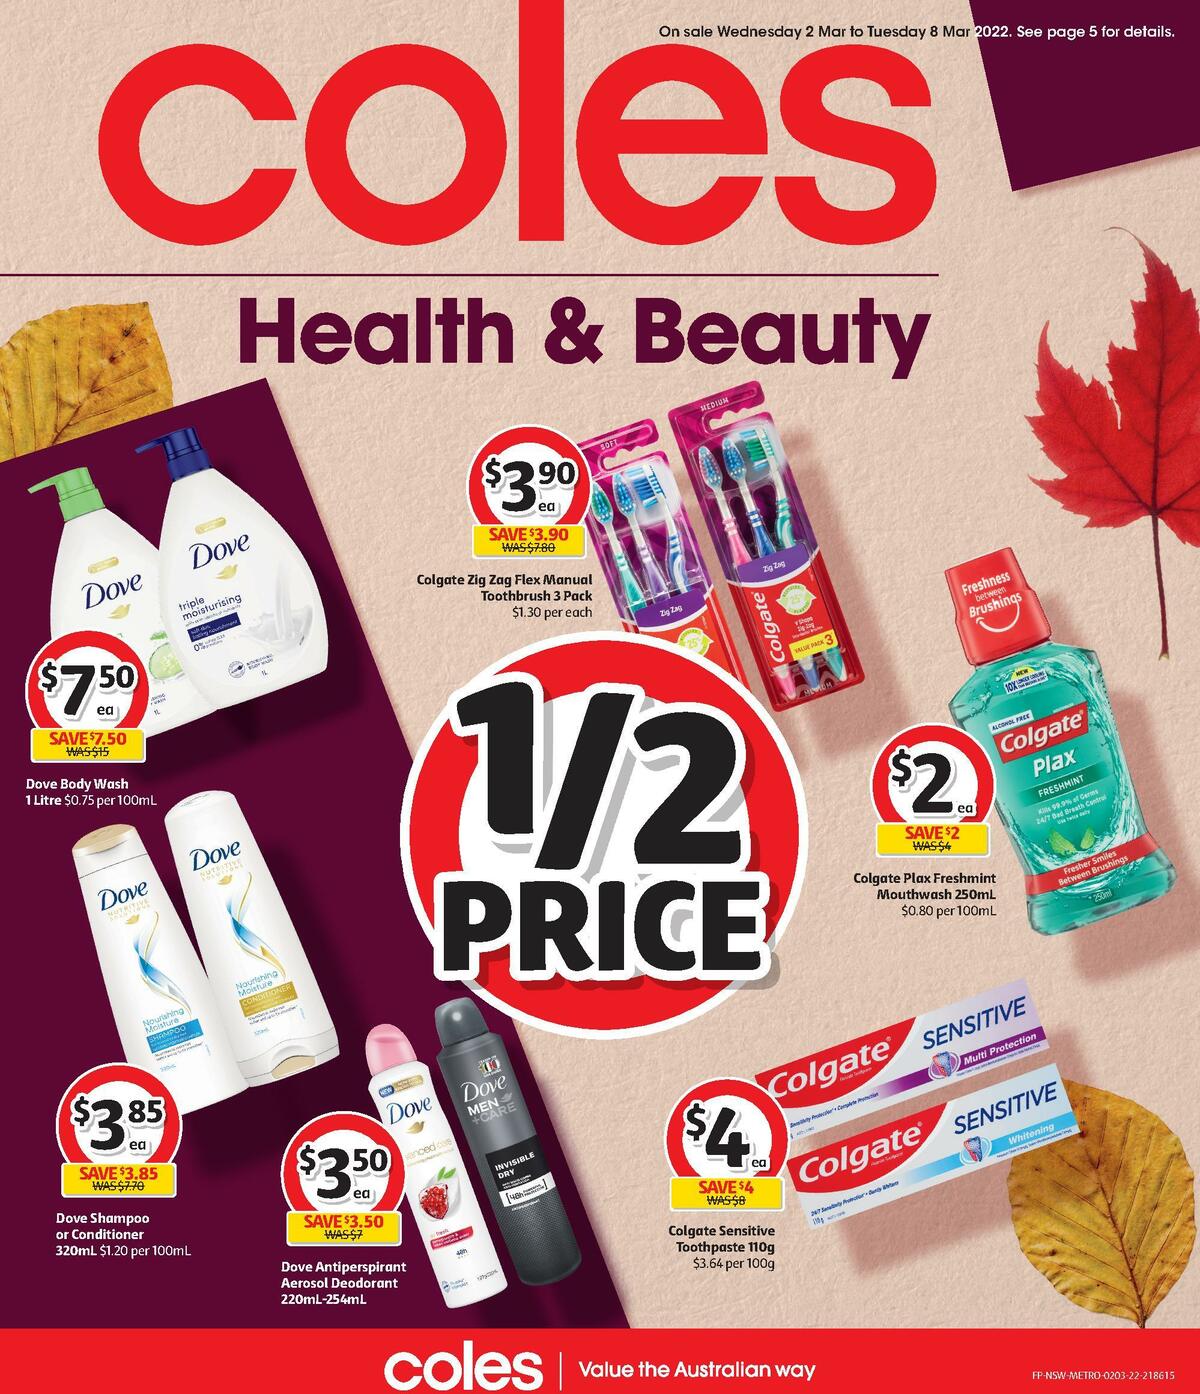 Coles Health & Beauty Catalogues from 2 March